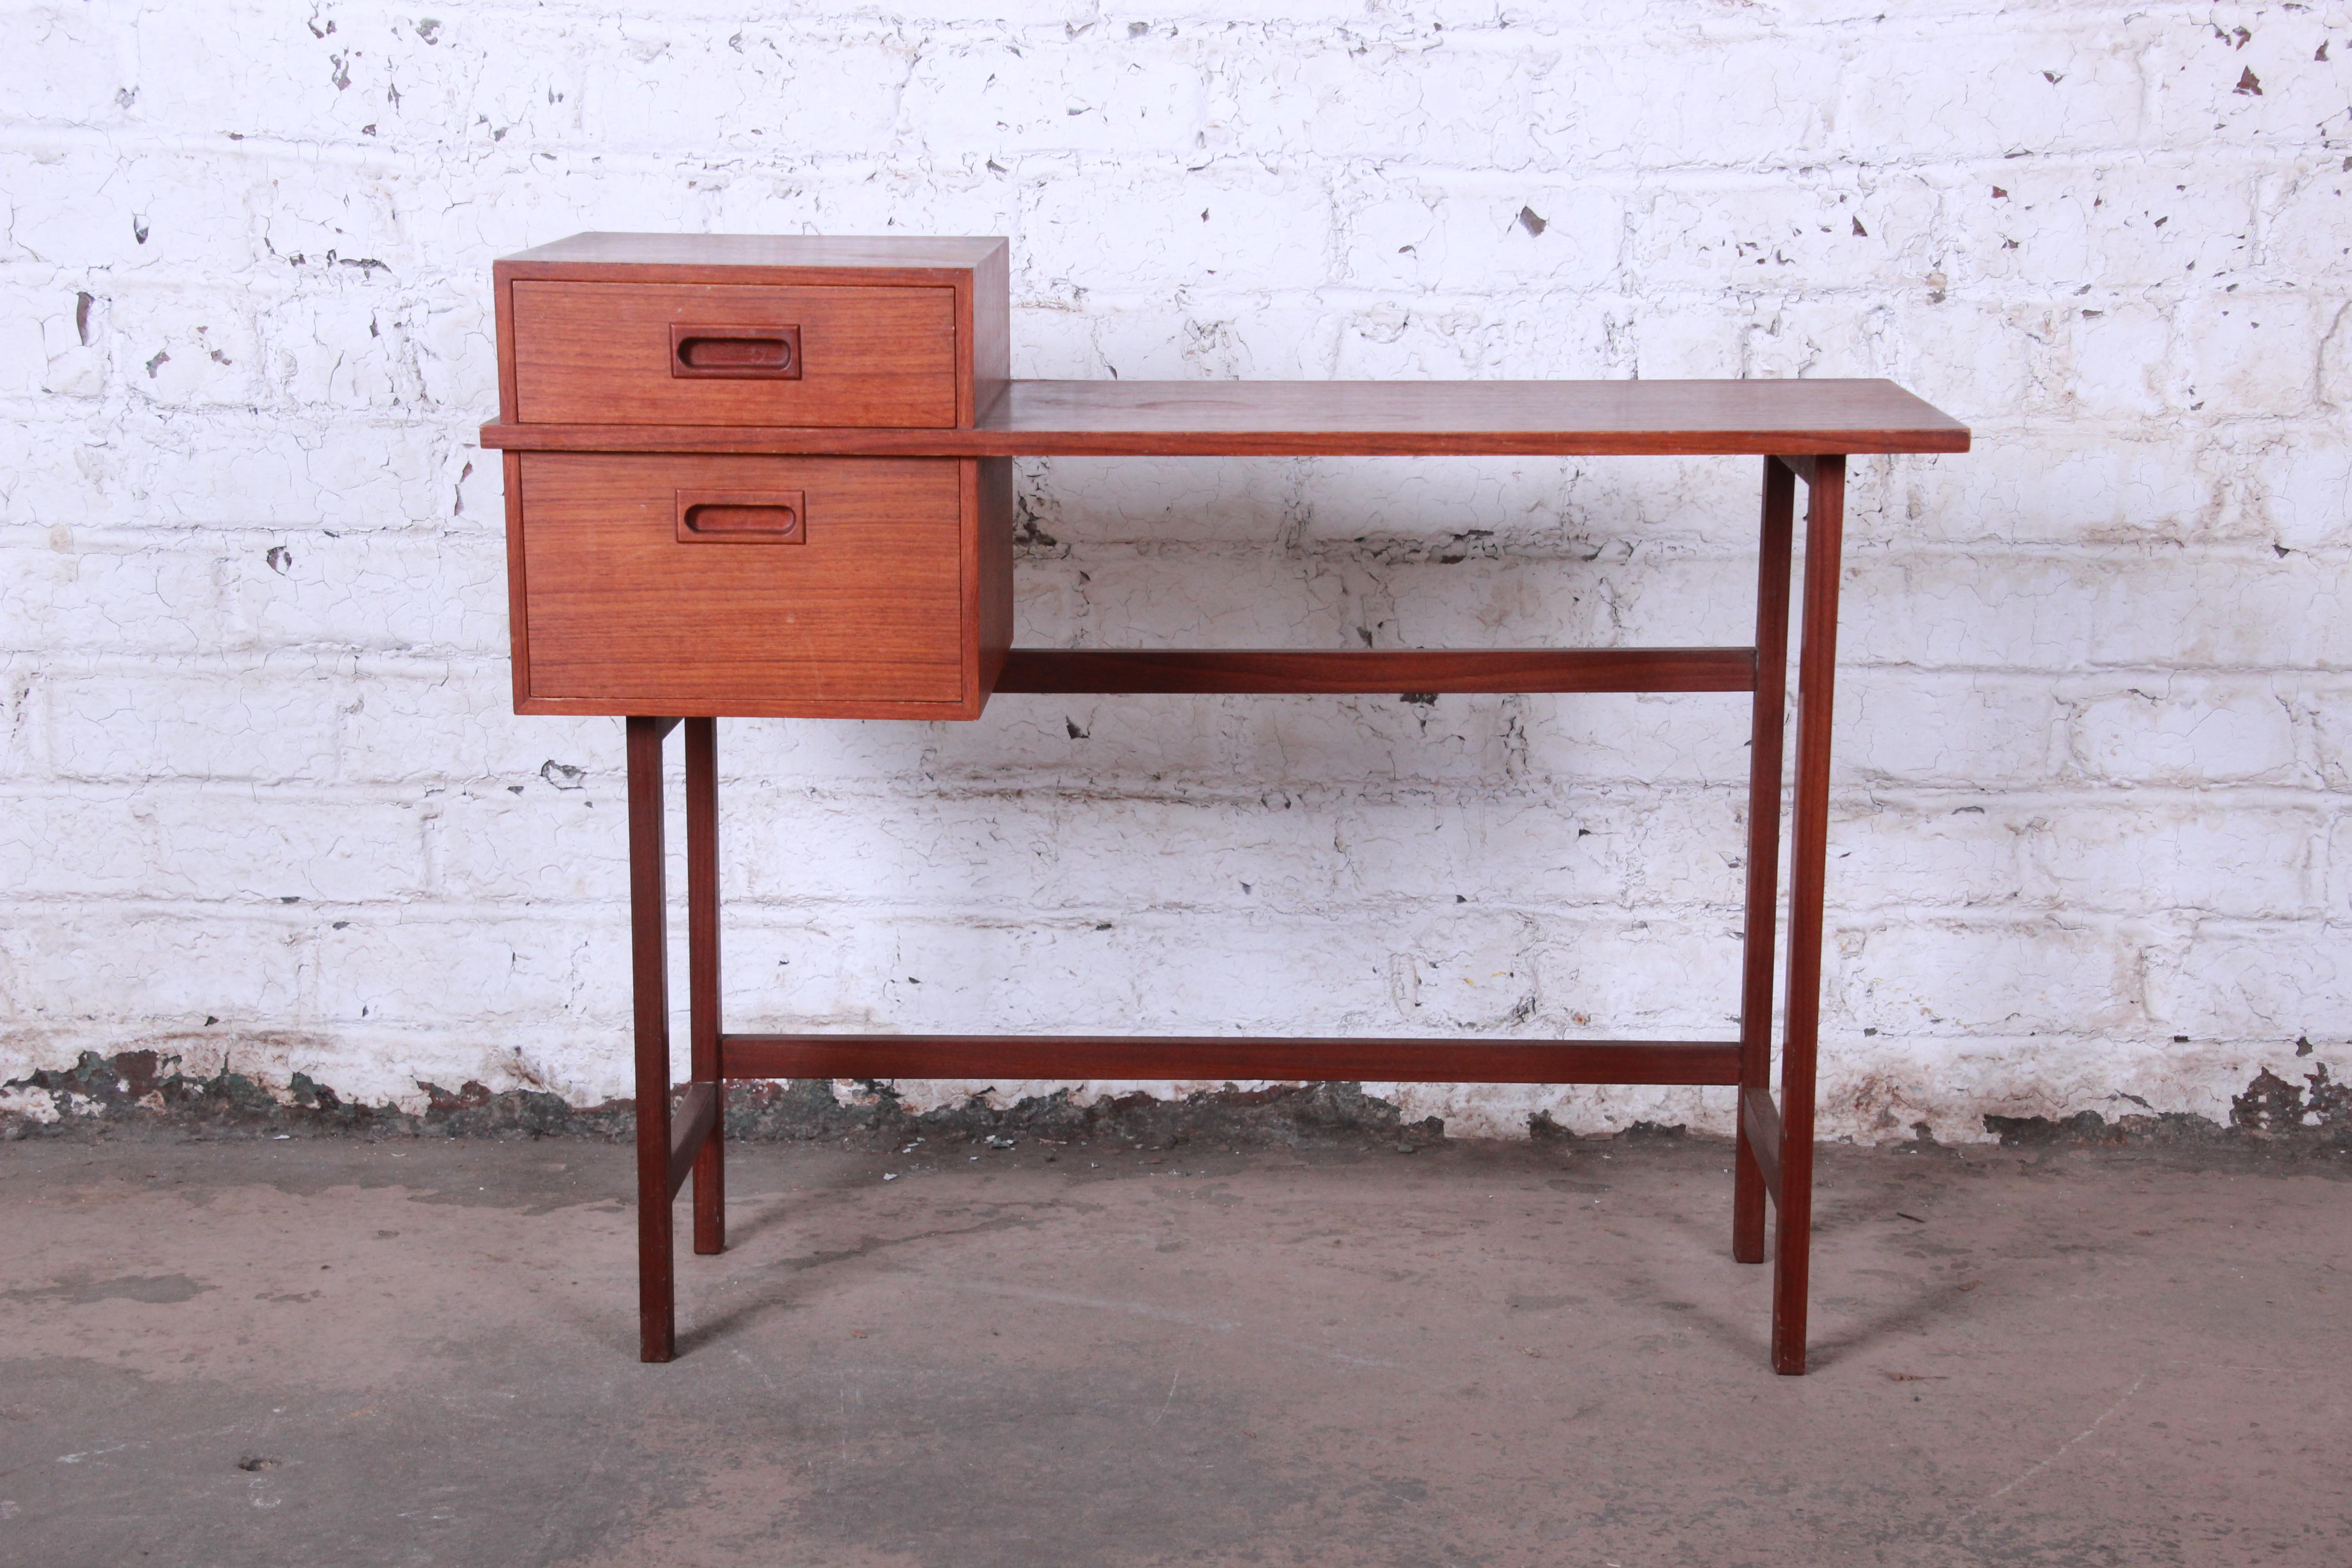 A beautiful and unique Mid-Century Modern vanity desk or console table. The desk was made in Sweden, circa 1950 by Glas & Tra. It features gorgeous teak wood grain, sleek Scandinavian design, and a nice petite size. The desk offers good storage,